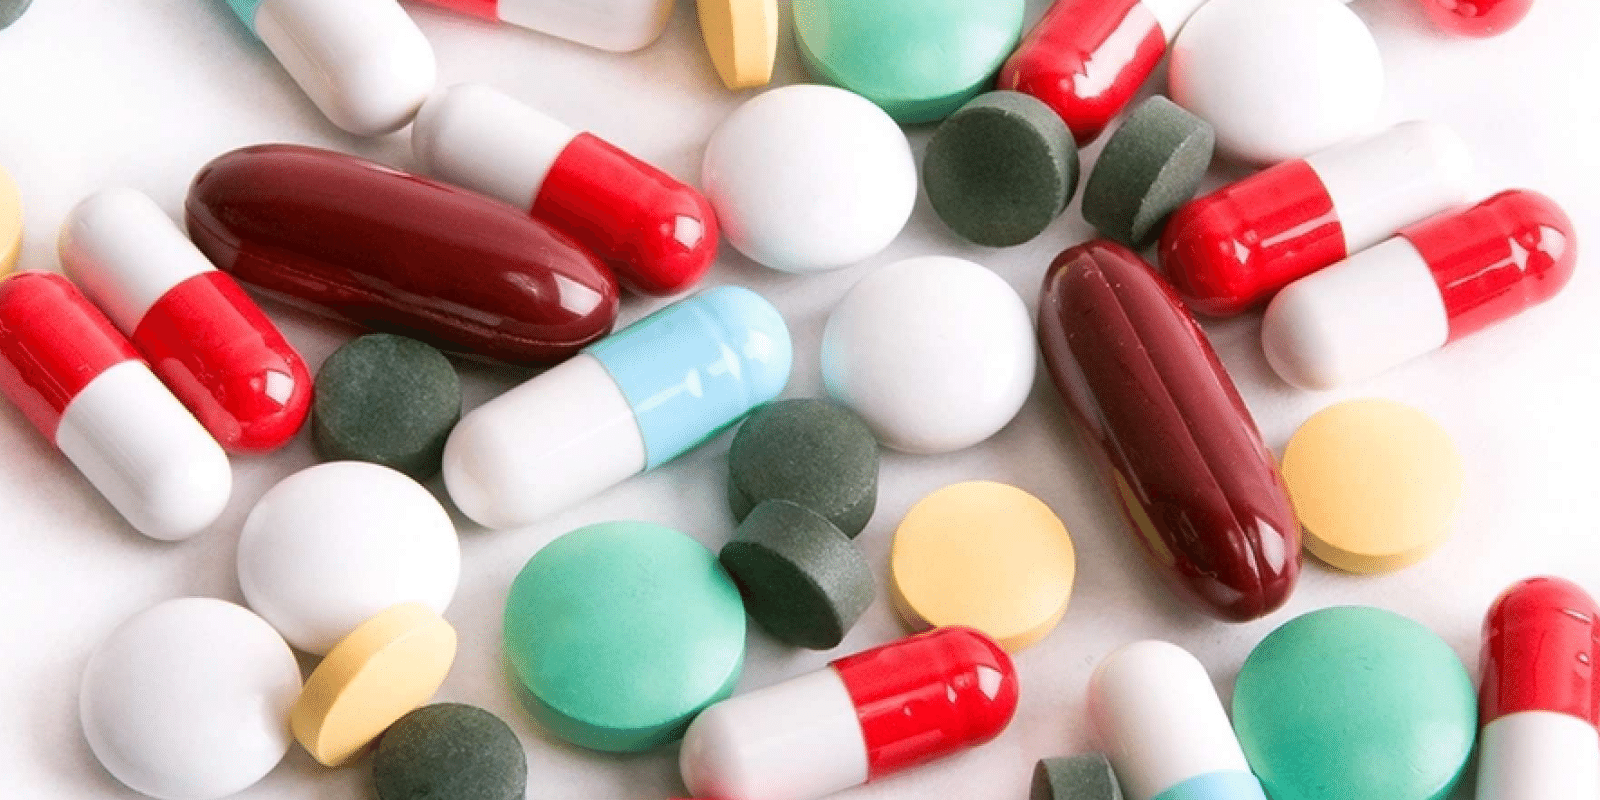 colorful pills and capsules scattered on a white background